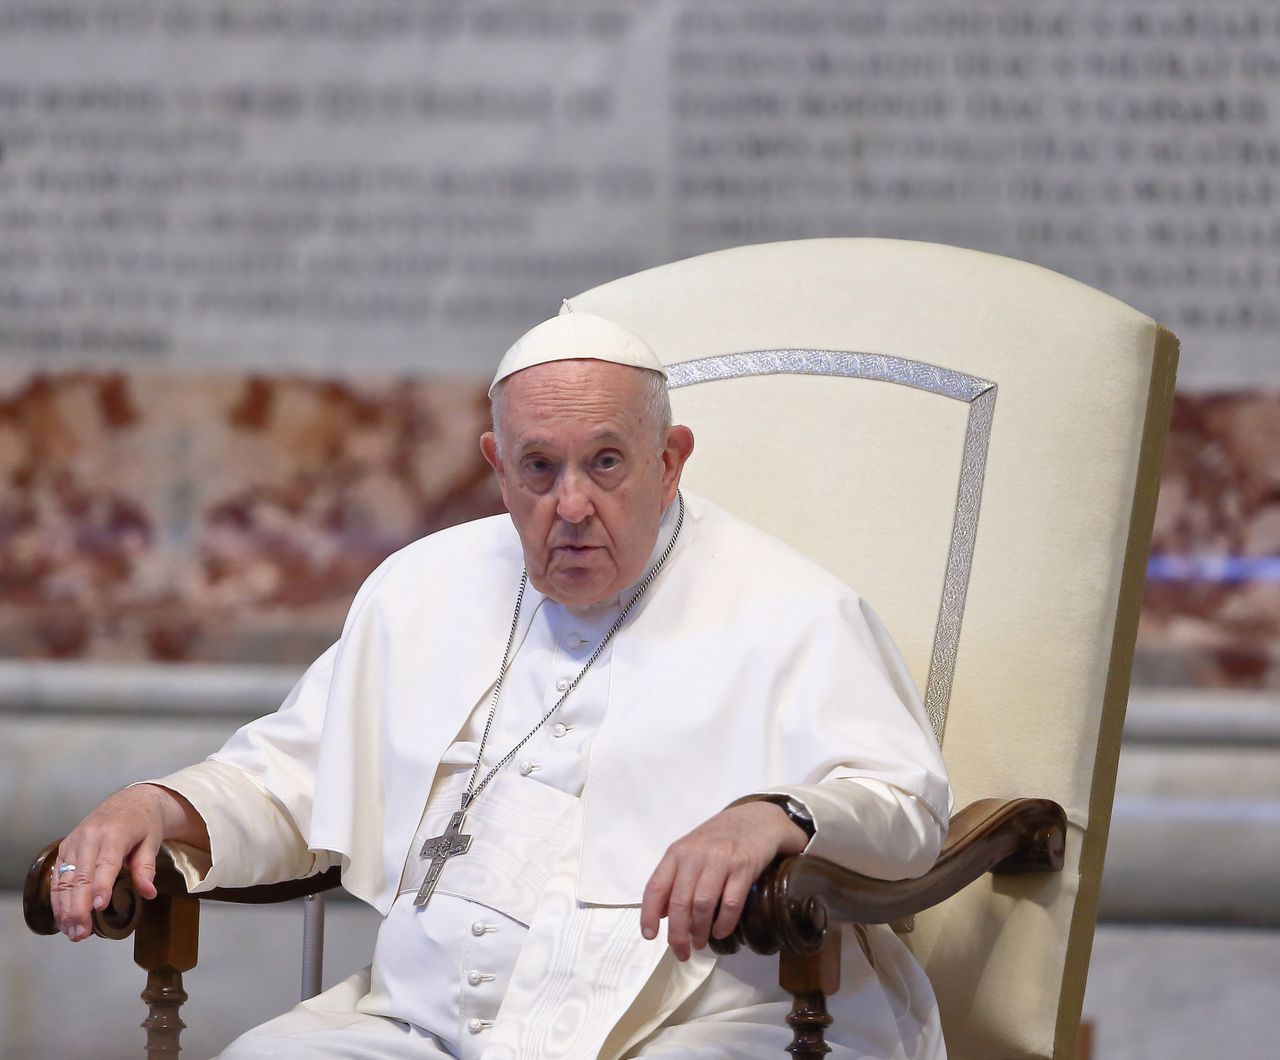 Pope Francis urges negotiation over the war in a heartfelt plea